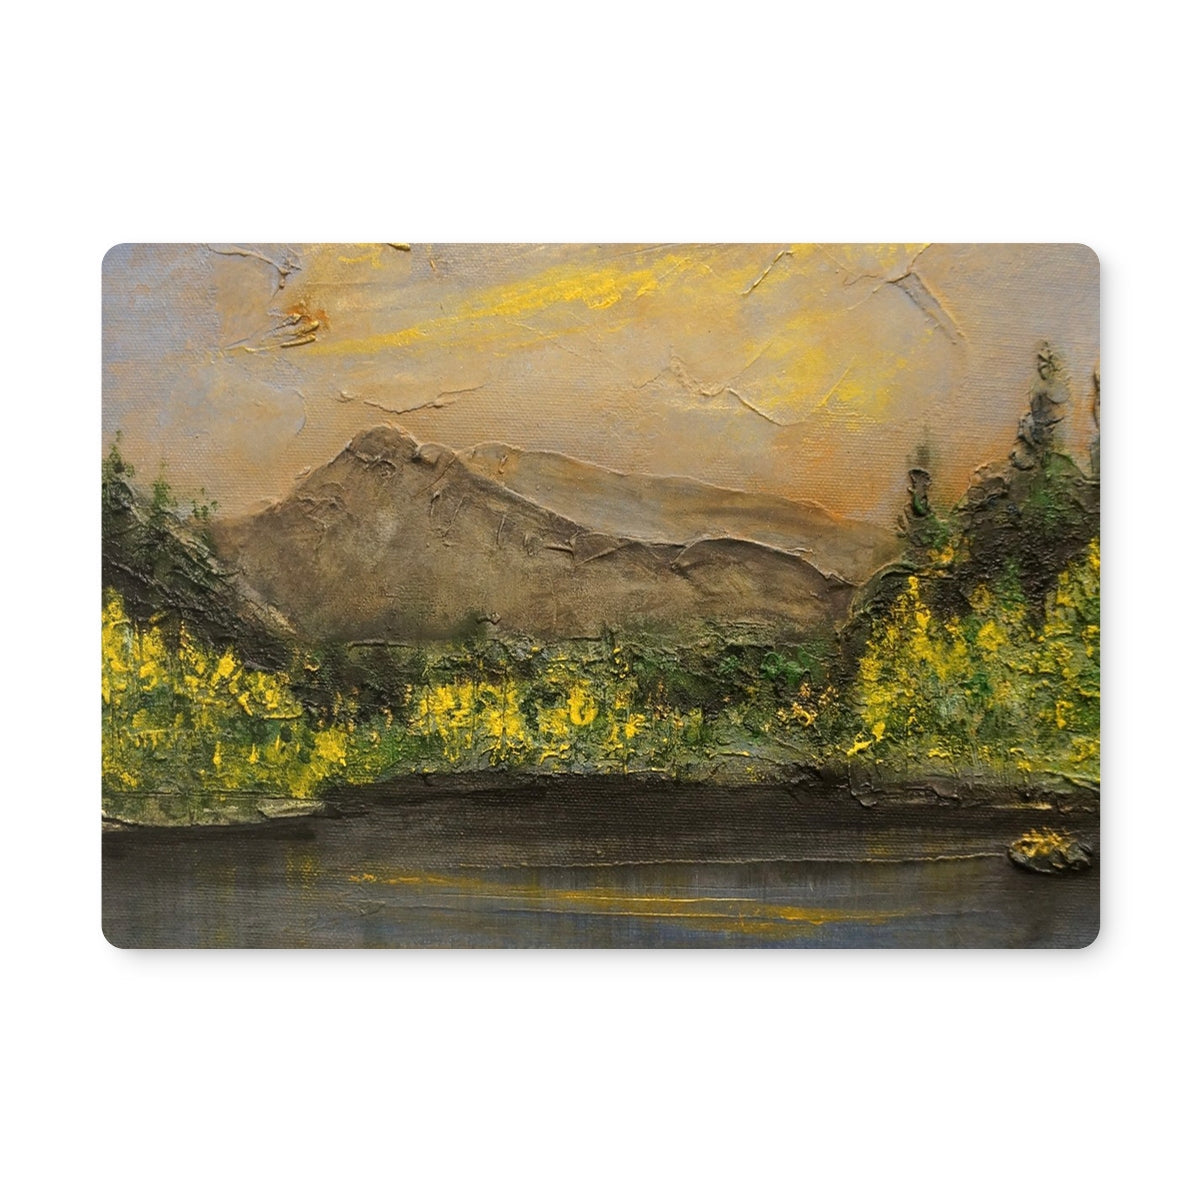 Glencoe Lochan Dusk Art Gifts Placemat-Placemats-Scottish Lochs & Mountains Art Gallery-2 Placemats-Paintings, Prints, Homeware, Art Gifts From Scotland By Scottish Artist Kevin Hunter